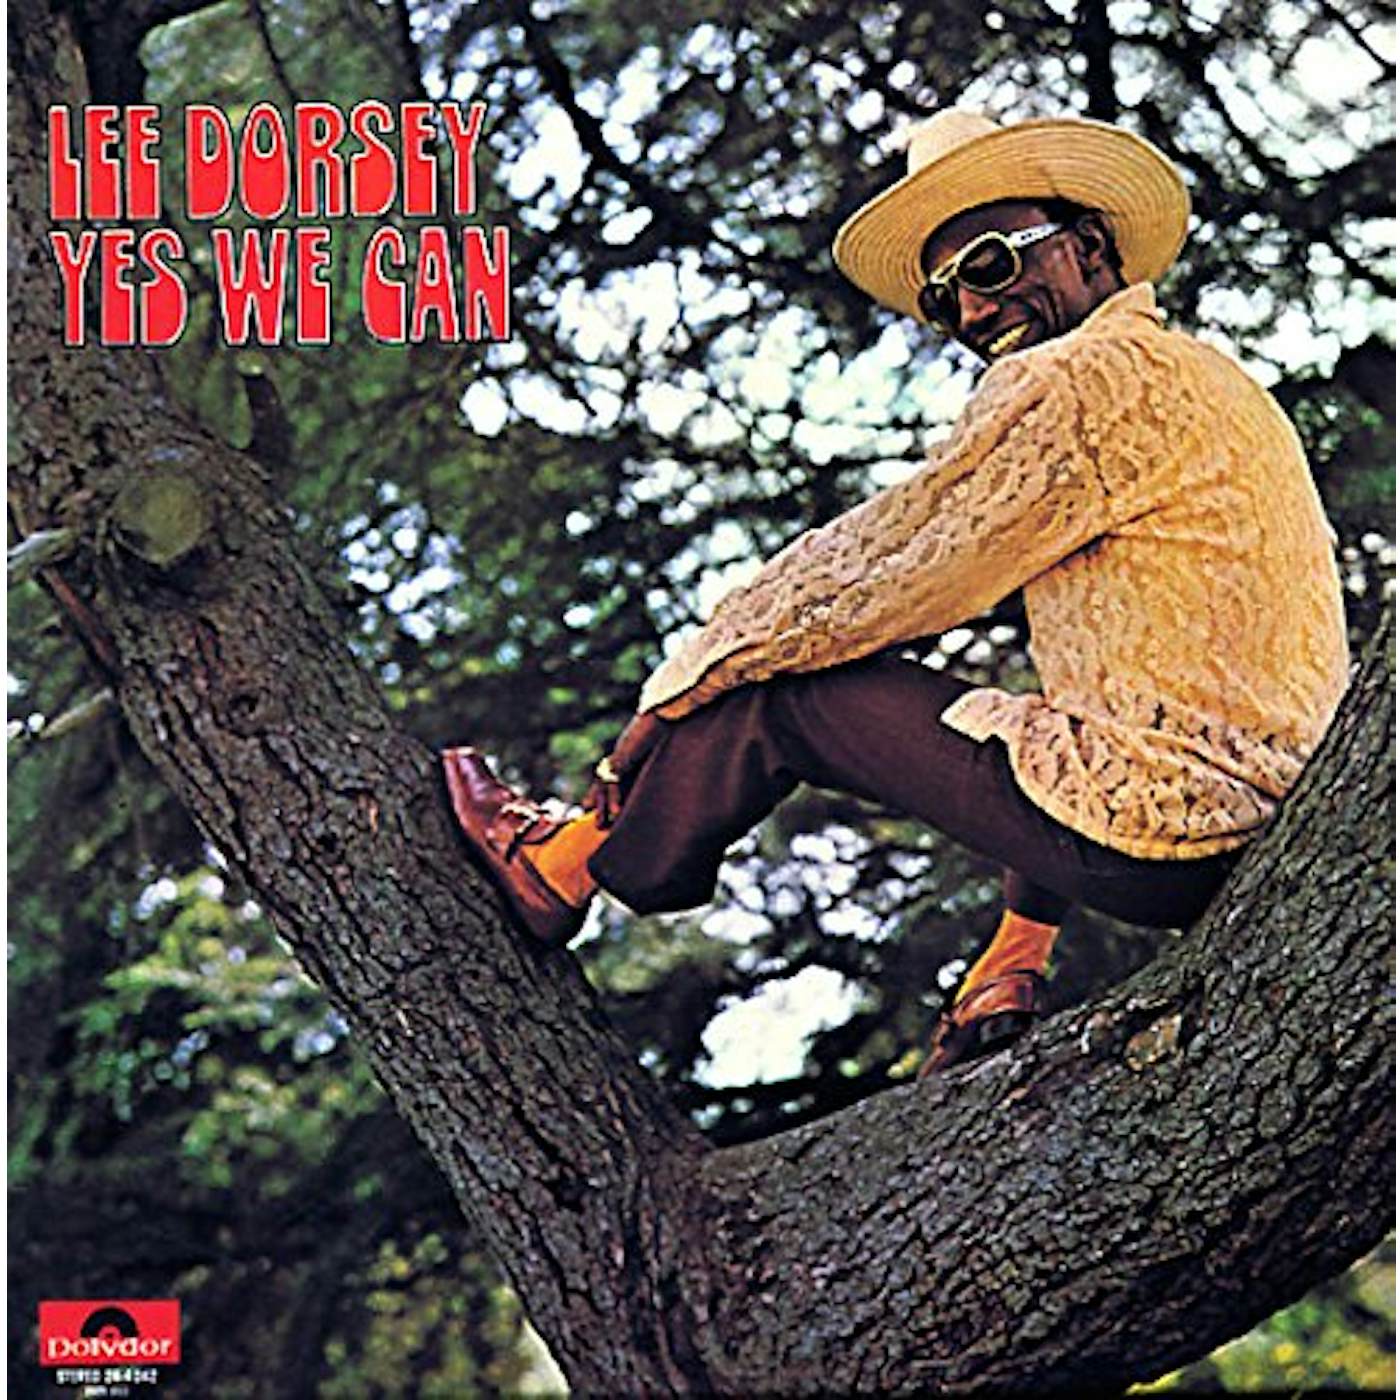 Lee Dorsey YES WE CAN CD